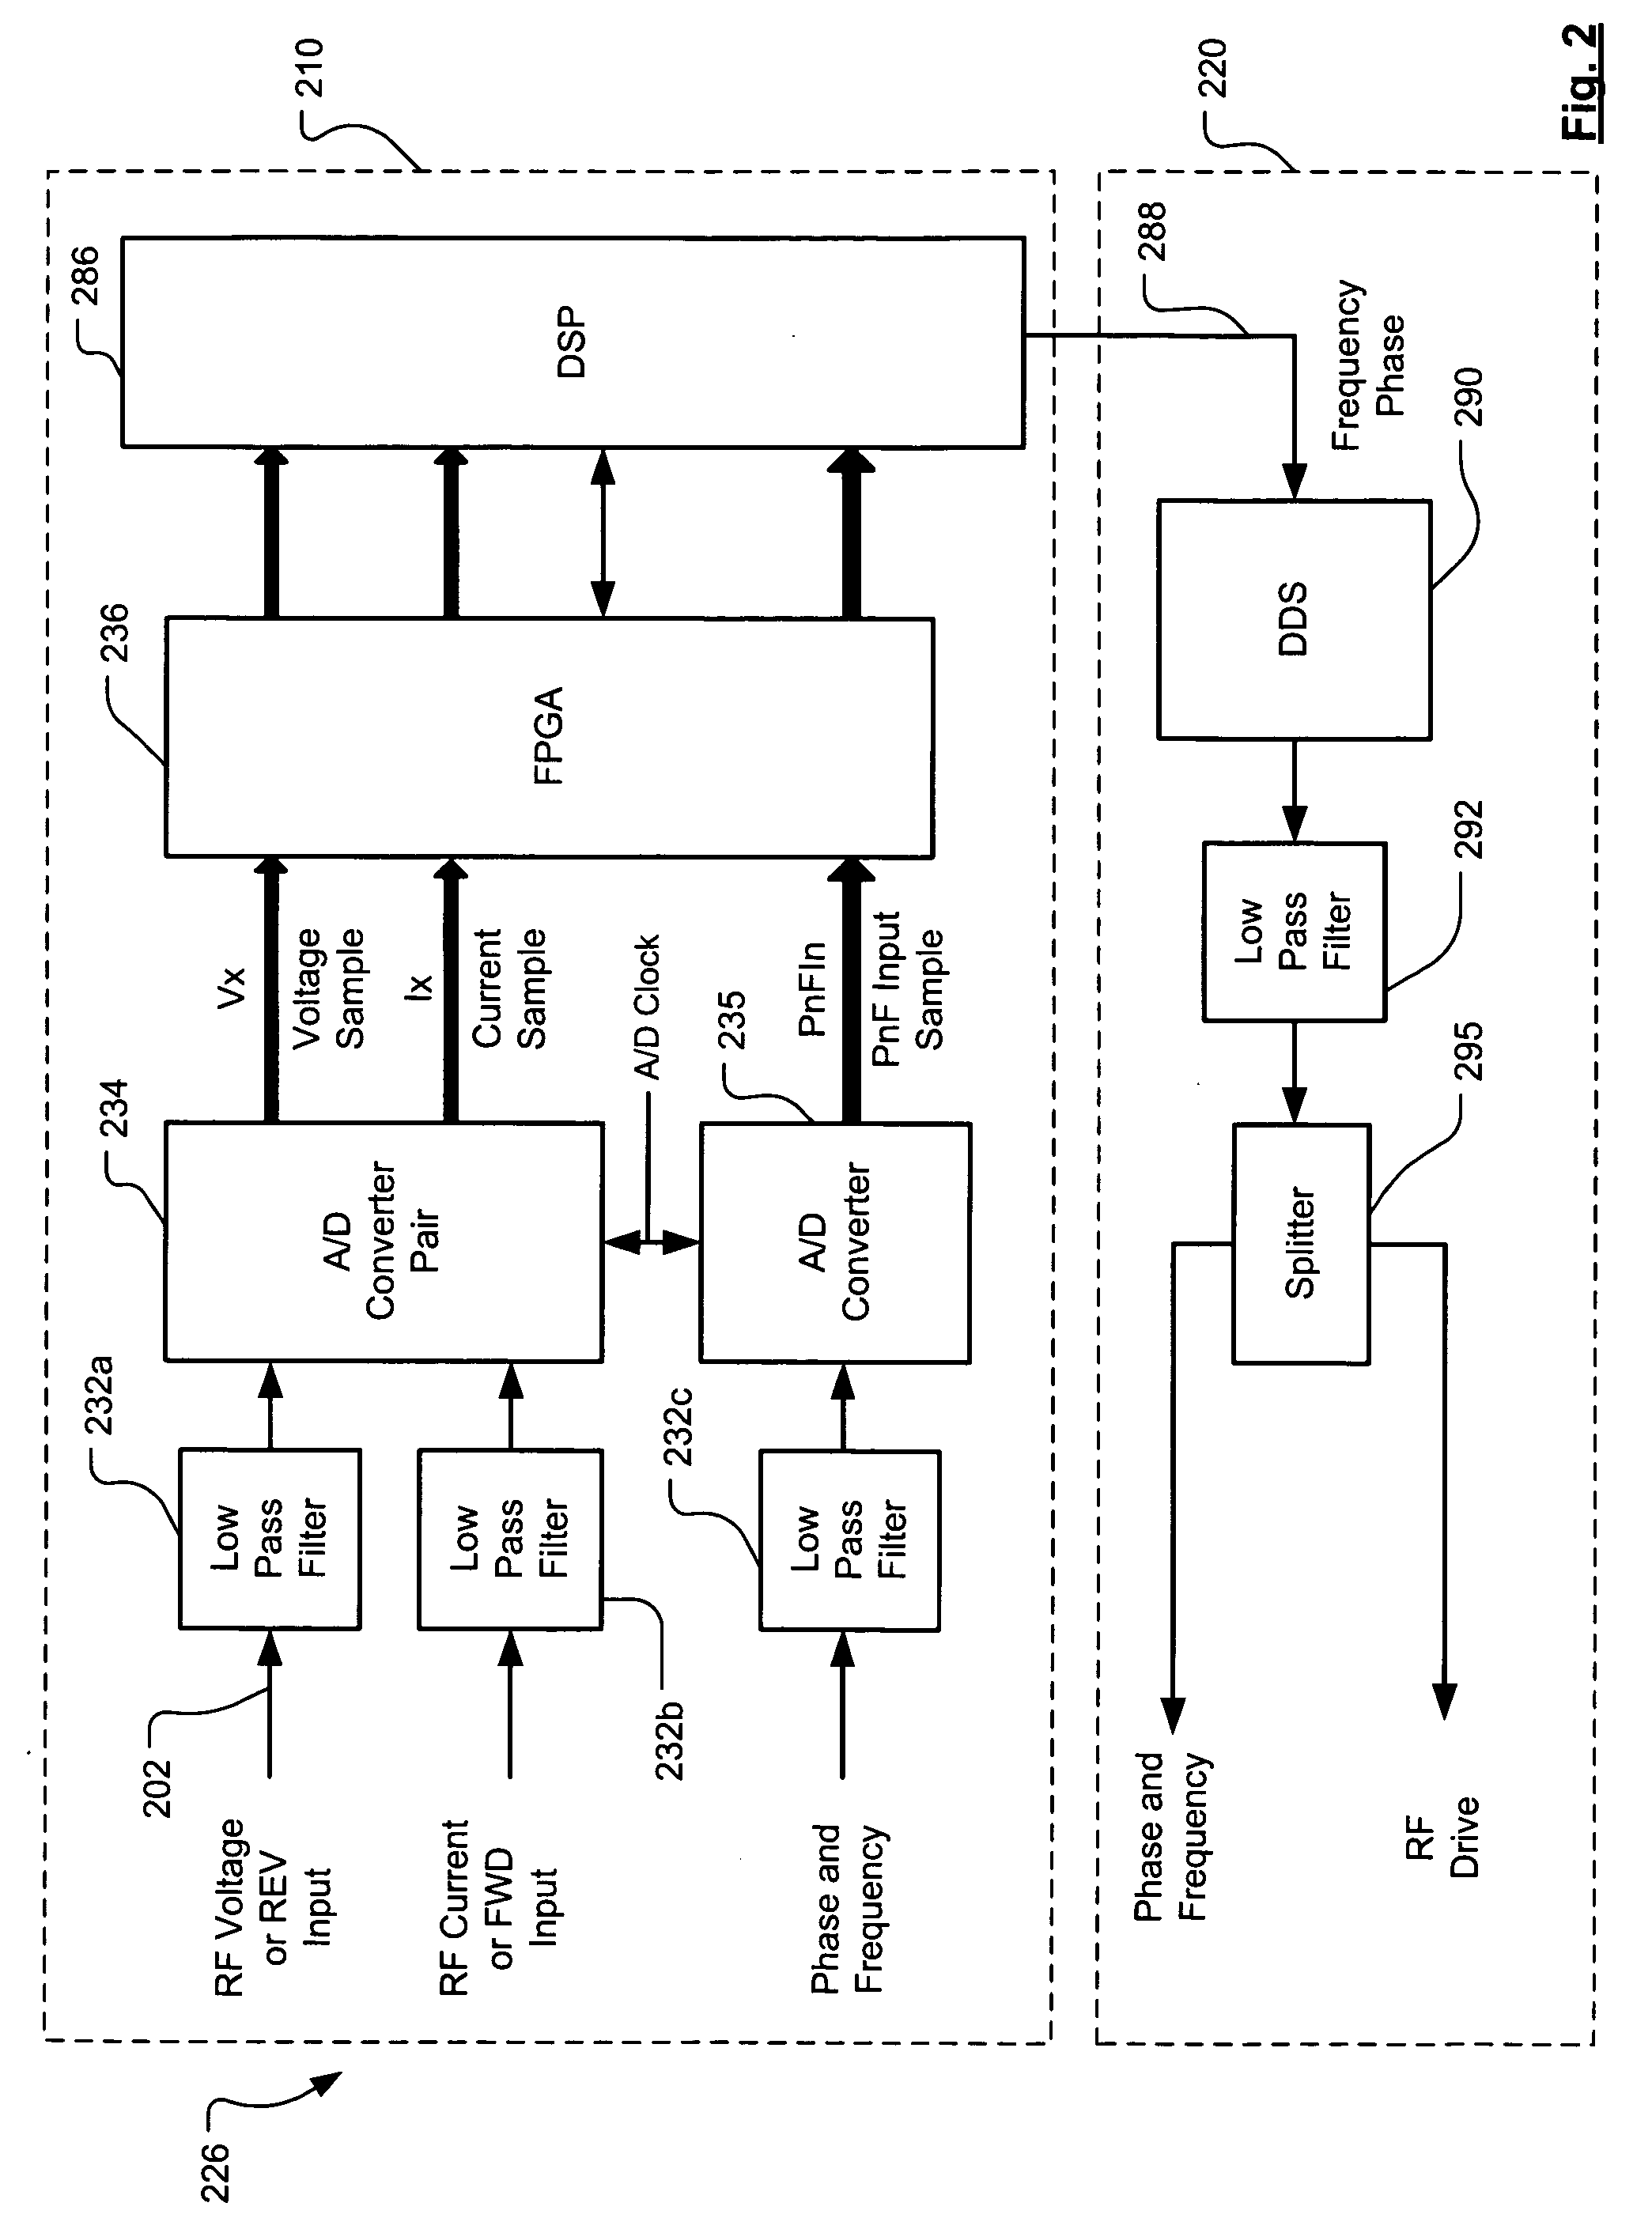 Phase and frequency control of a radio frequency generator from an external source